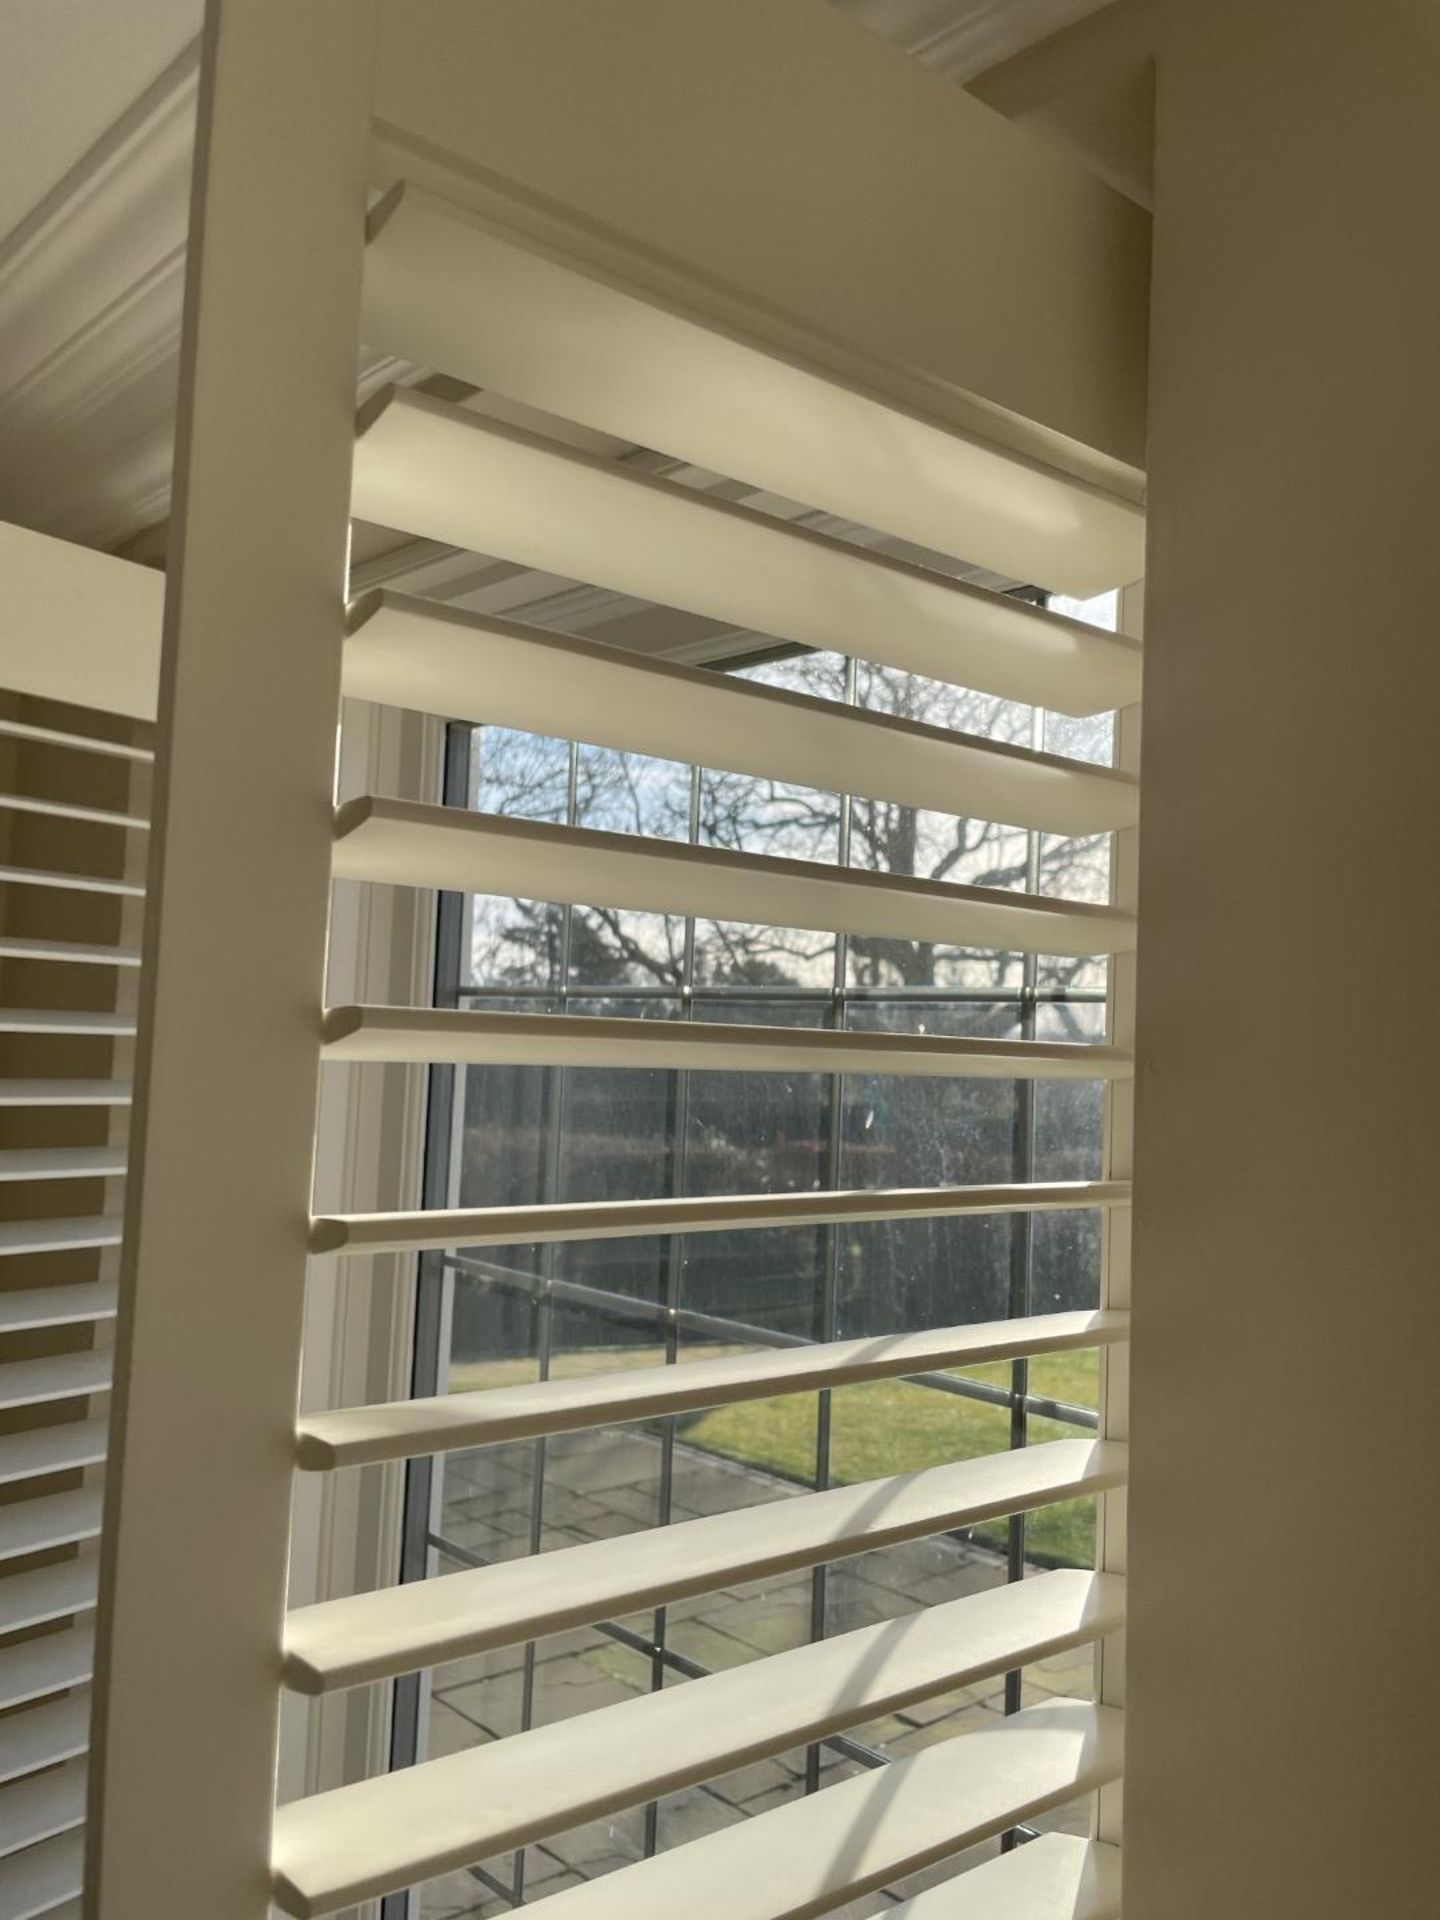 1 x Hardwood Timber Double Glazed Window Frames fitted with Shutter Blinds, In White - Ref: PAN107 - Image 6 of 15